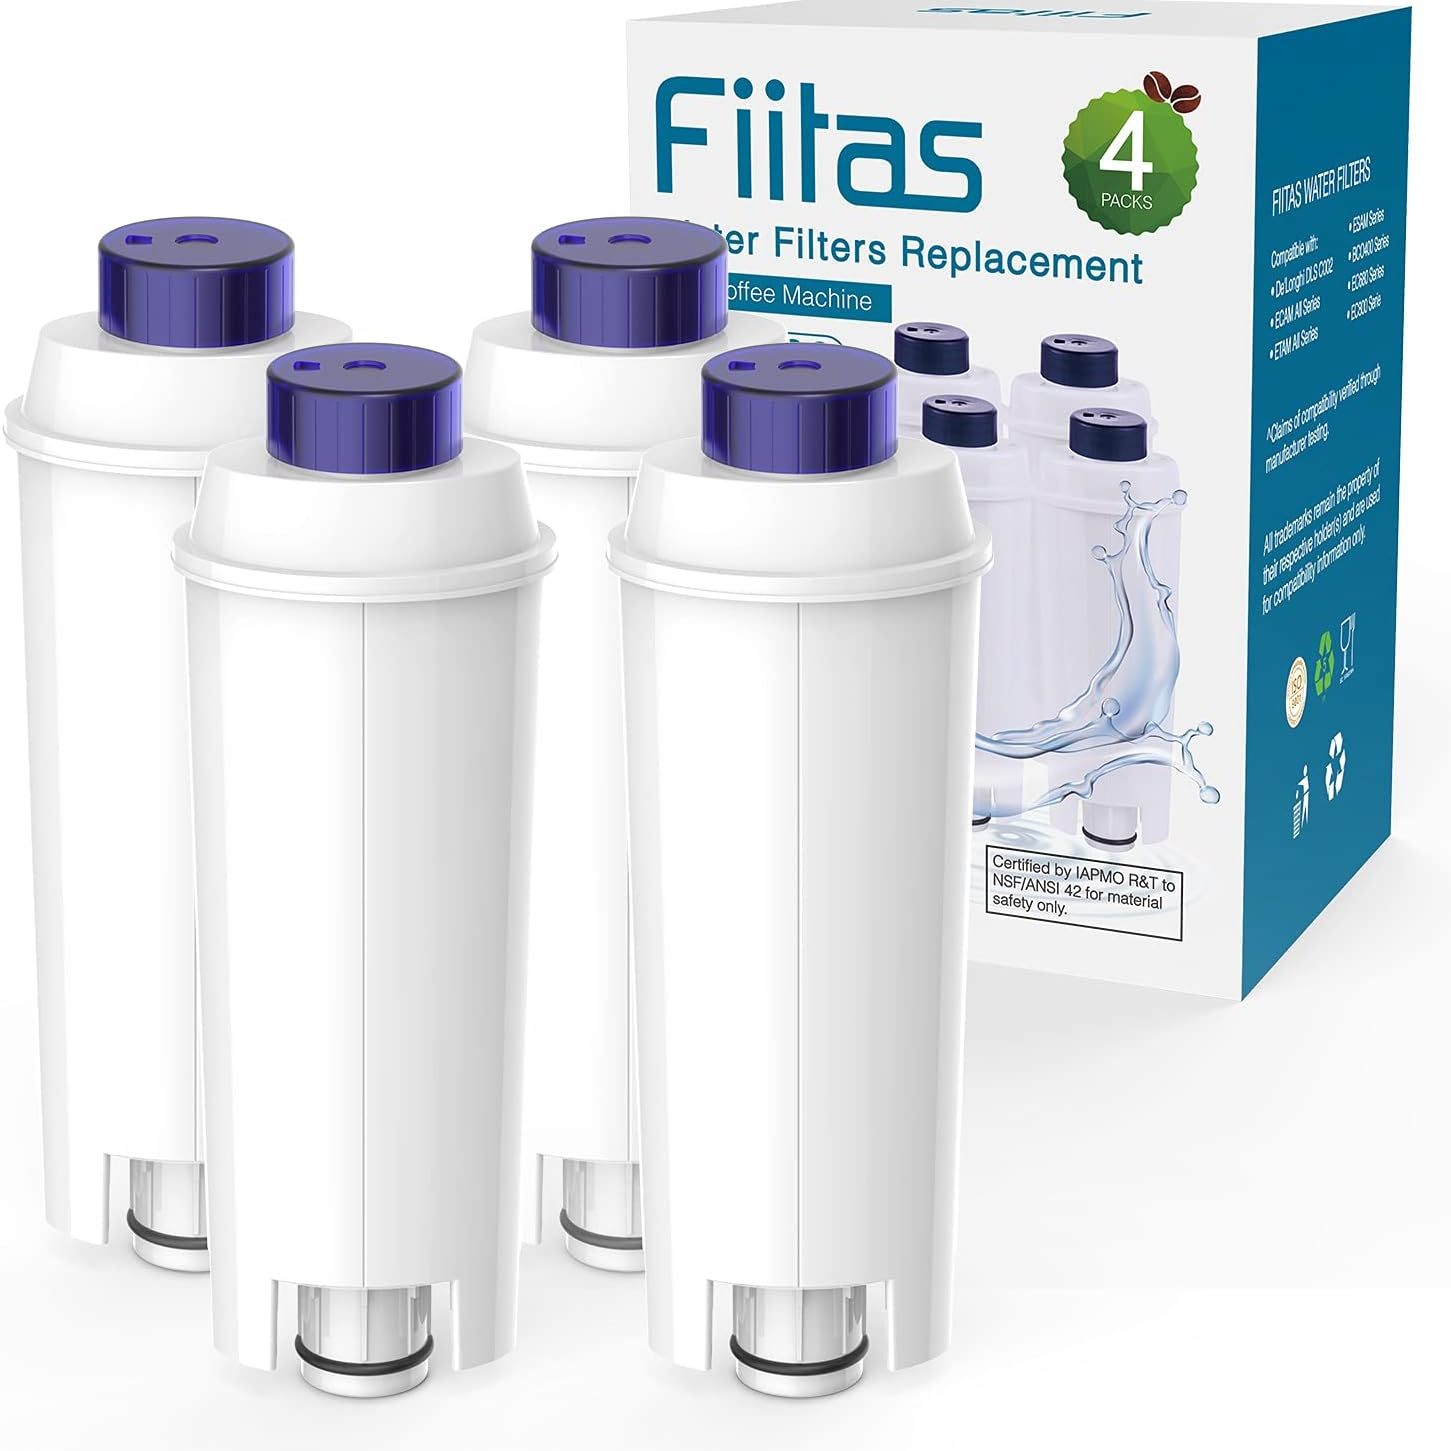  Fiitas Water Filter for Delonghi Magnifica s Dinamica ECAM Esam  Coffee Machine Series (6 Packs) : Home & Kitchen